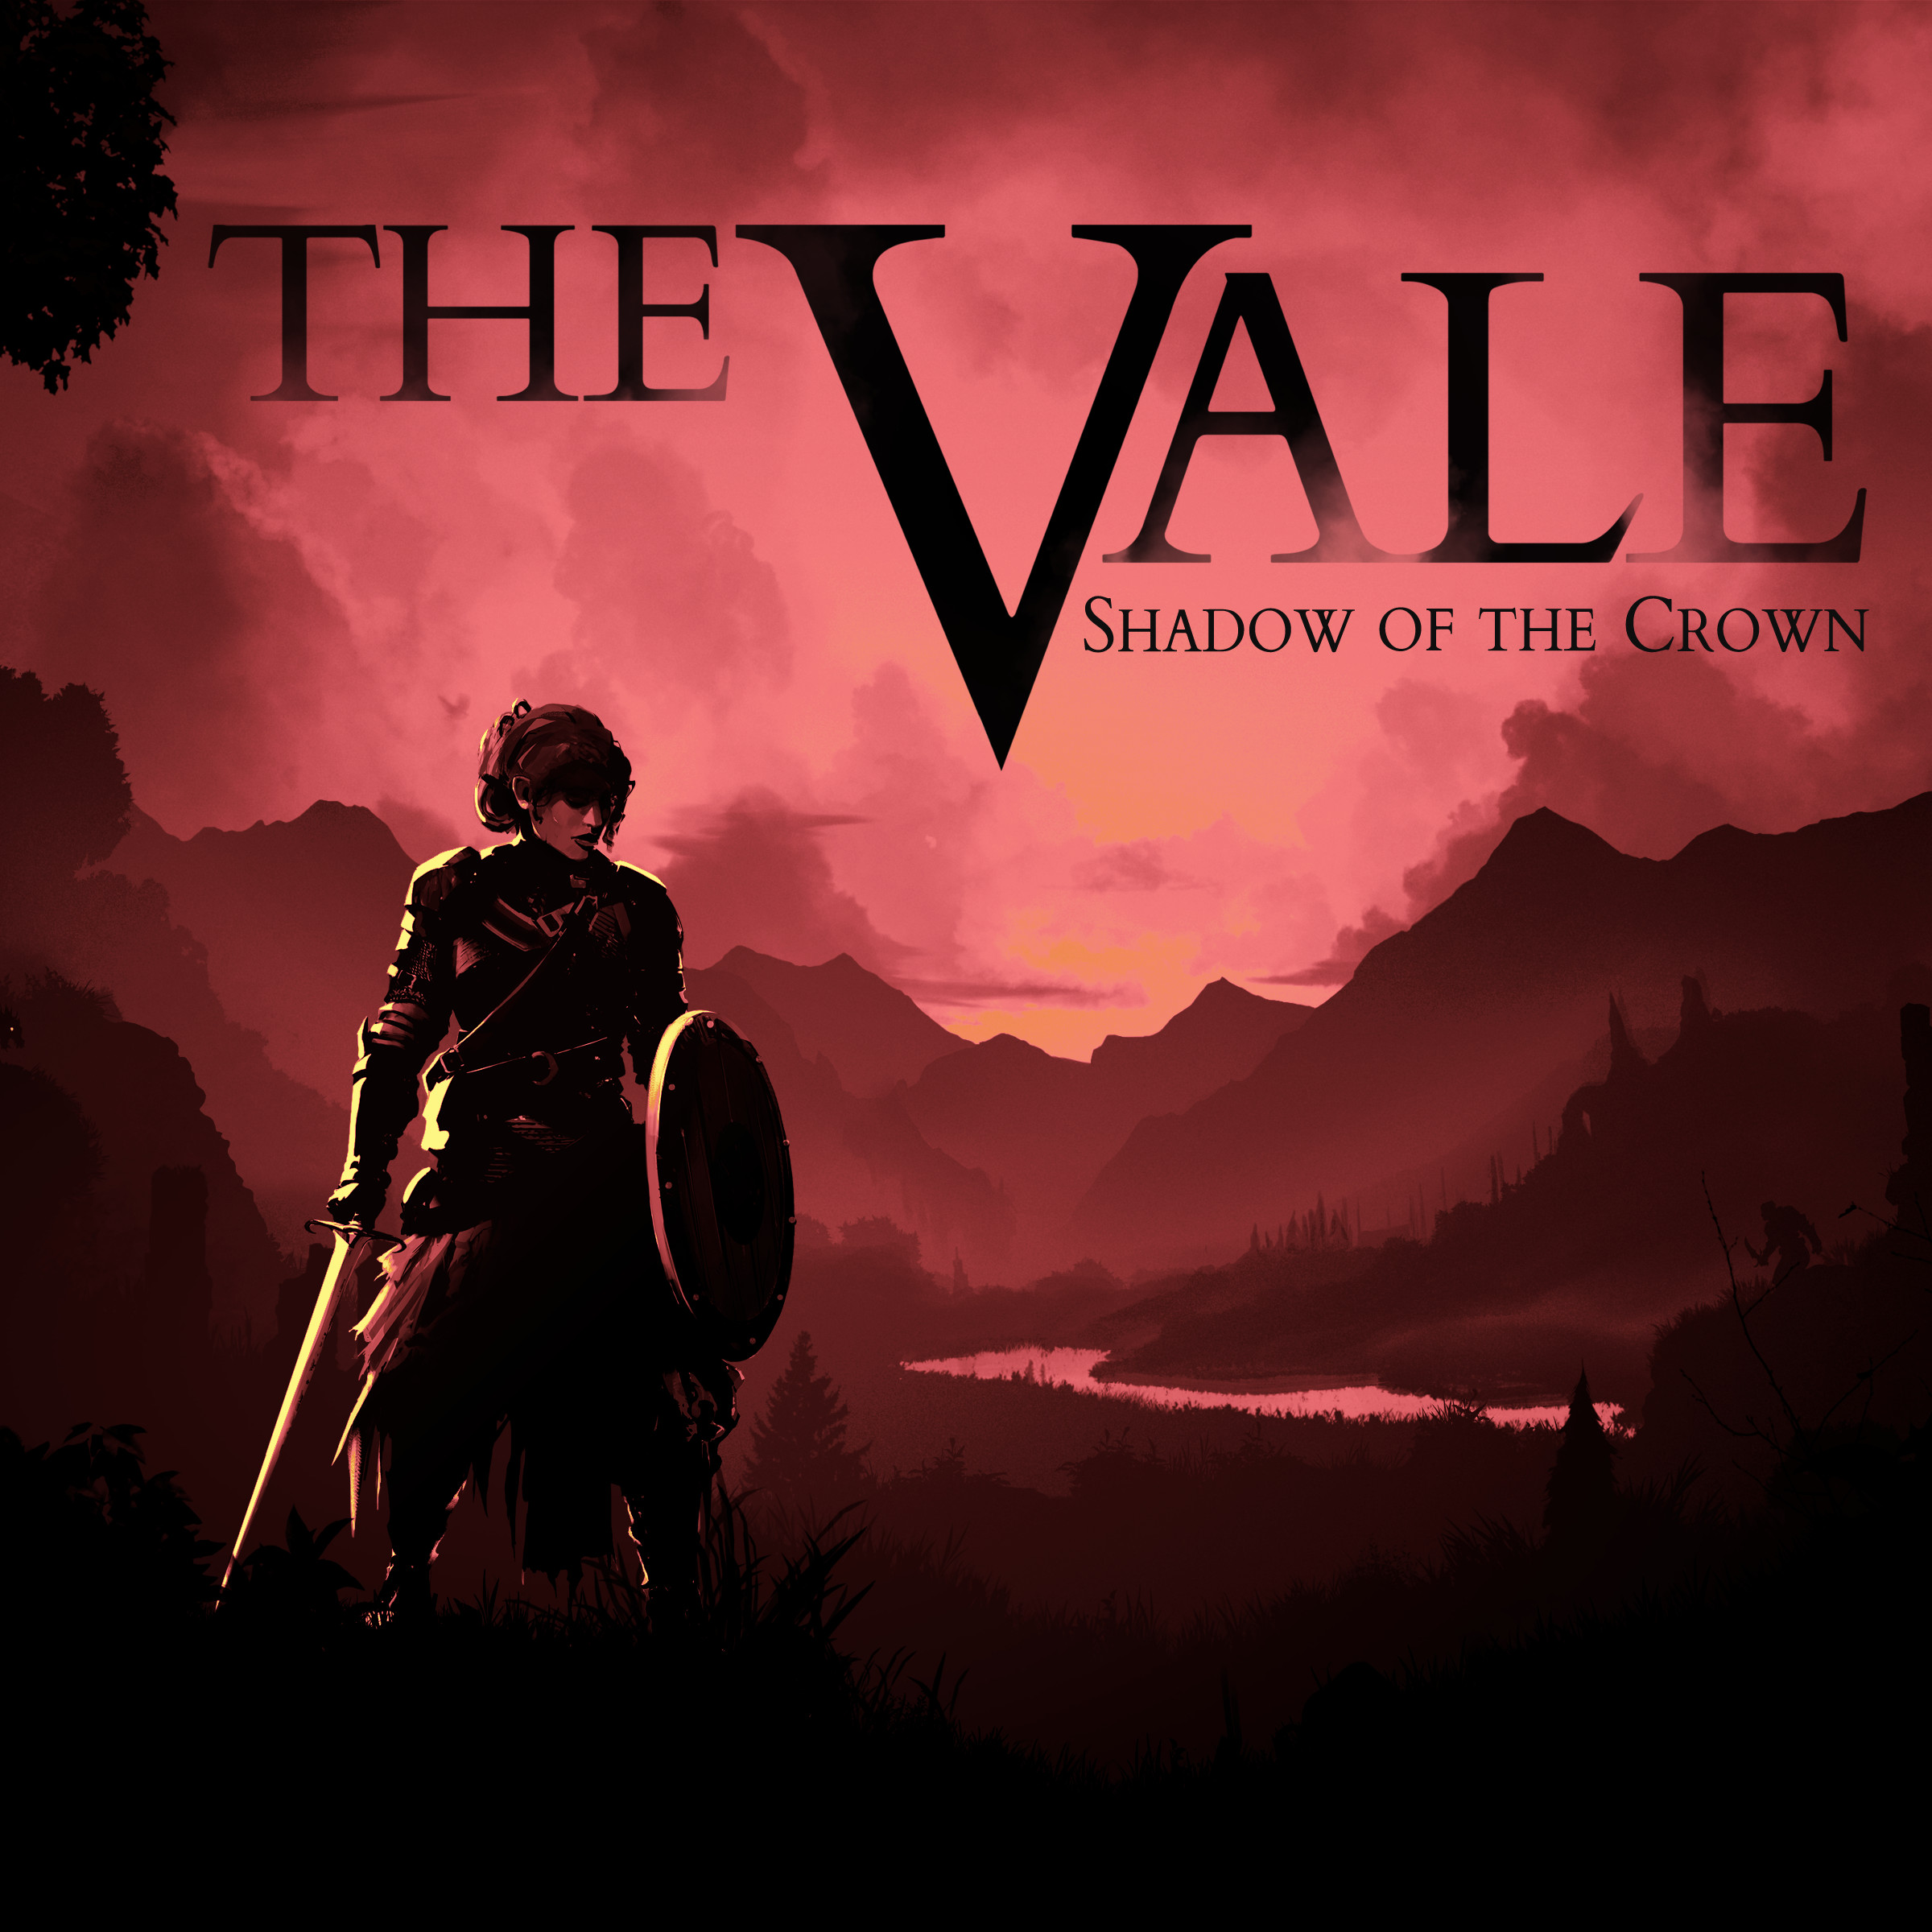 Title screen of The Vale, showing Alex, the player character, holding a sword and shield as she stands in shadow in front of a dark, red-tinted landscape.